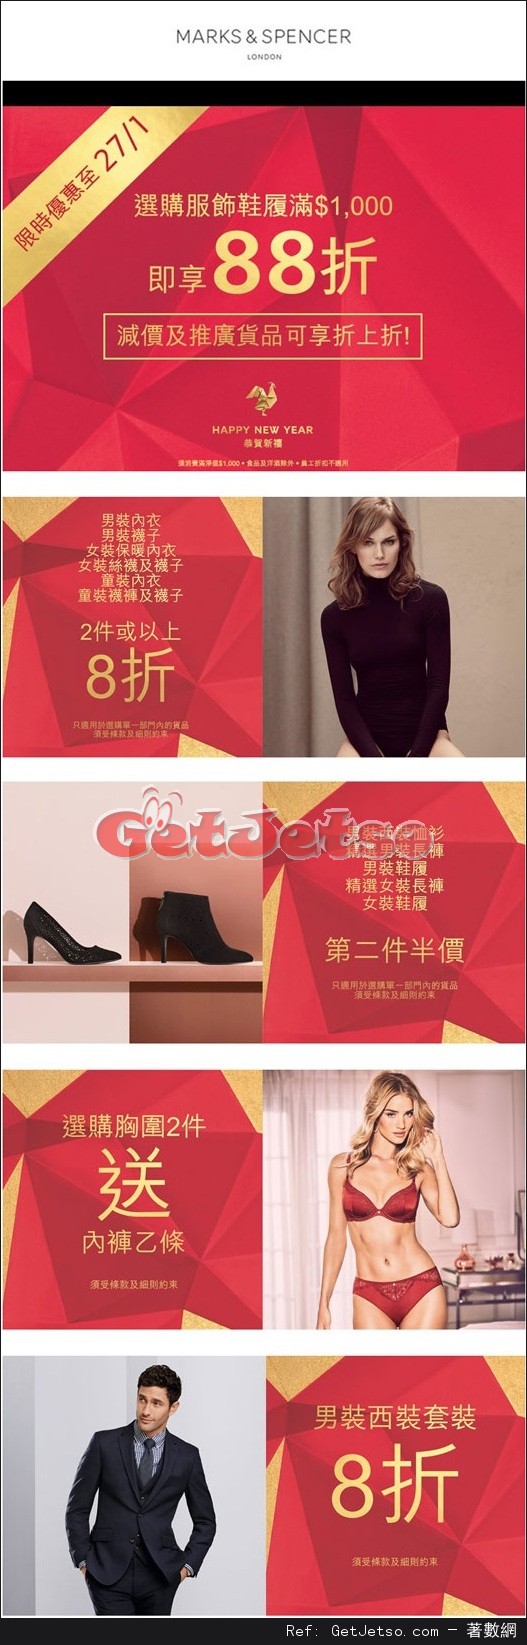 Marks and Spencer 農曆新年限時優惠(至17年1月27日)圖片1